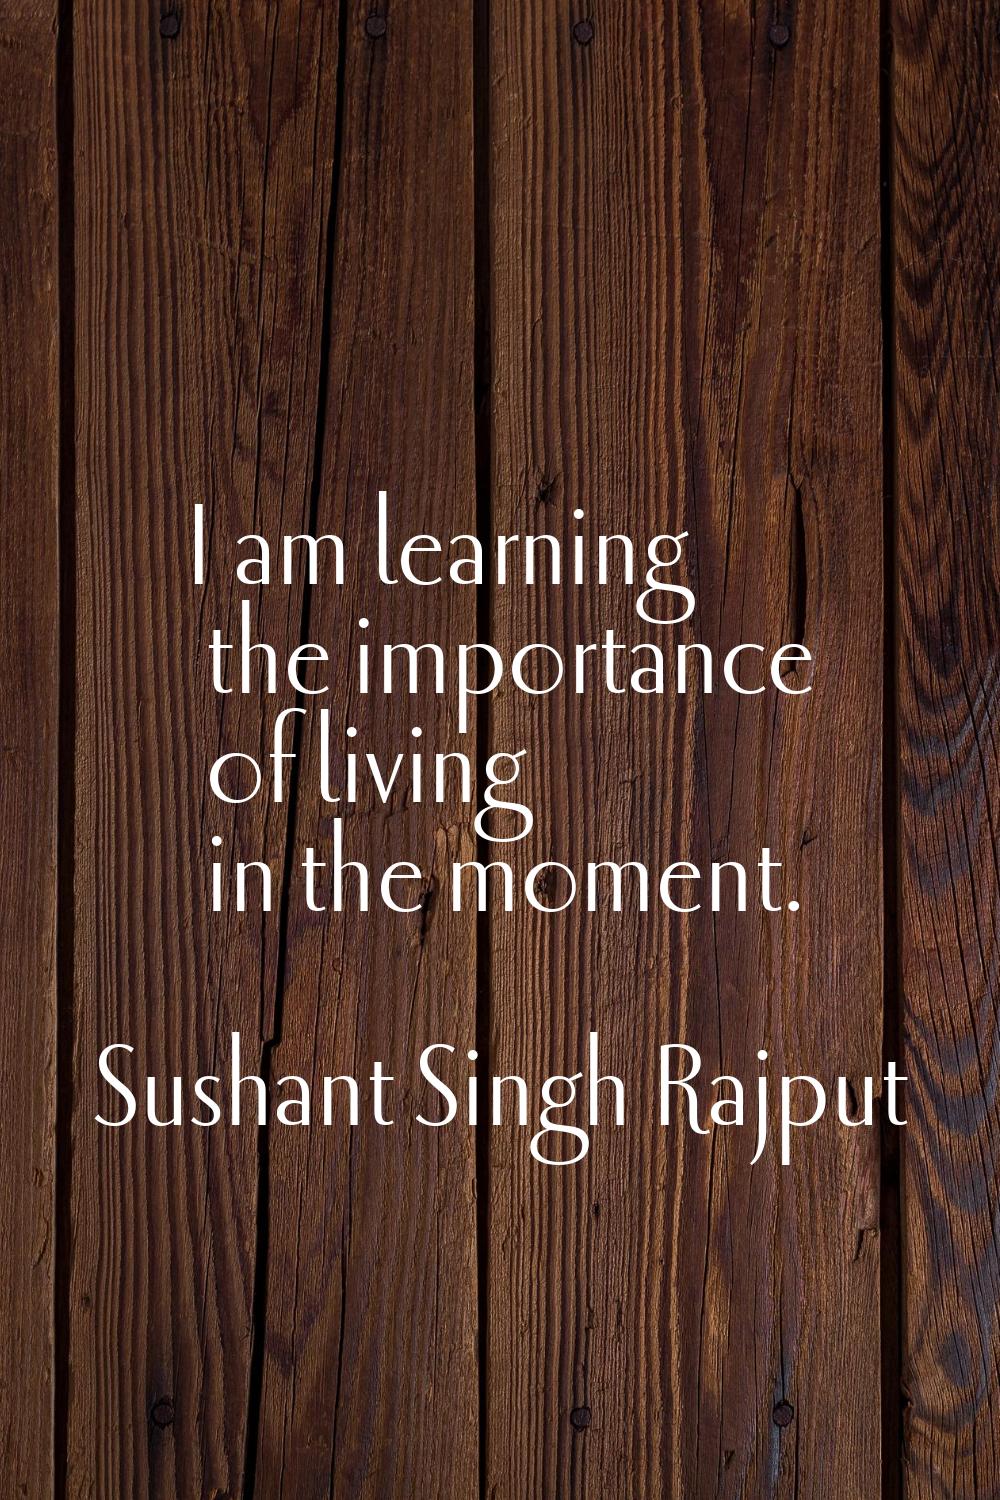 I am learning the importance of living in the moment.